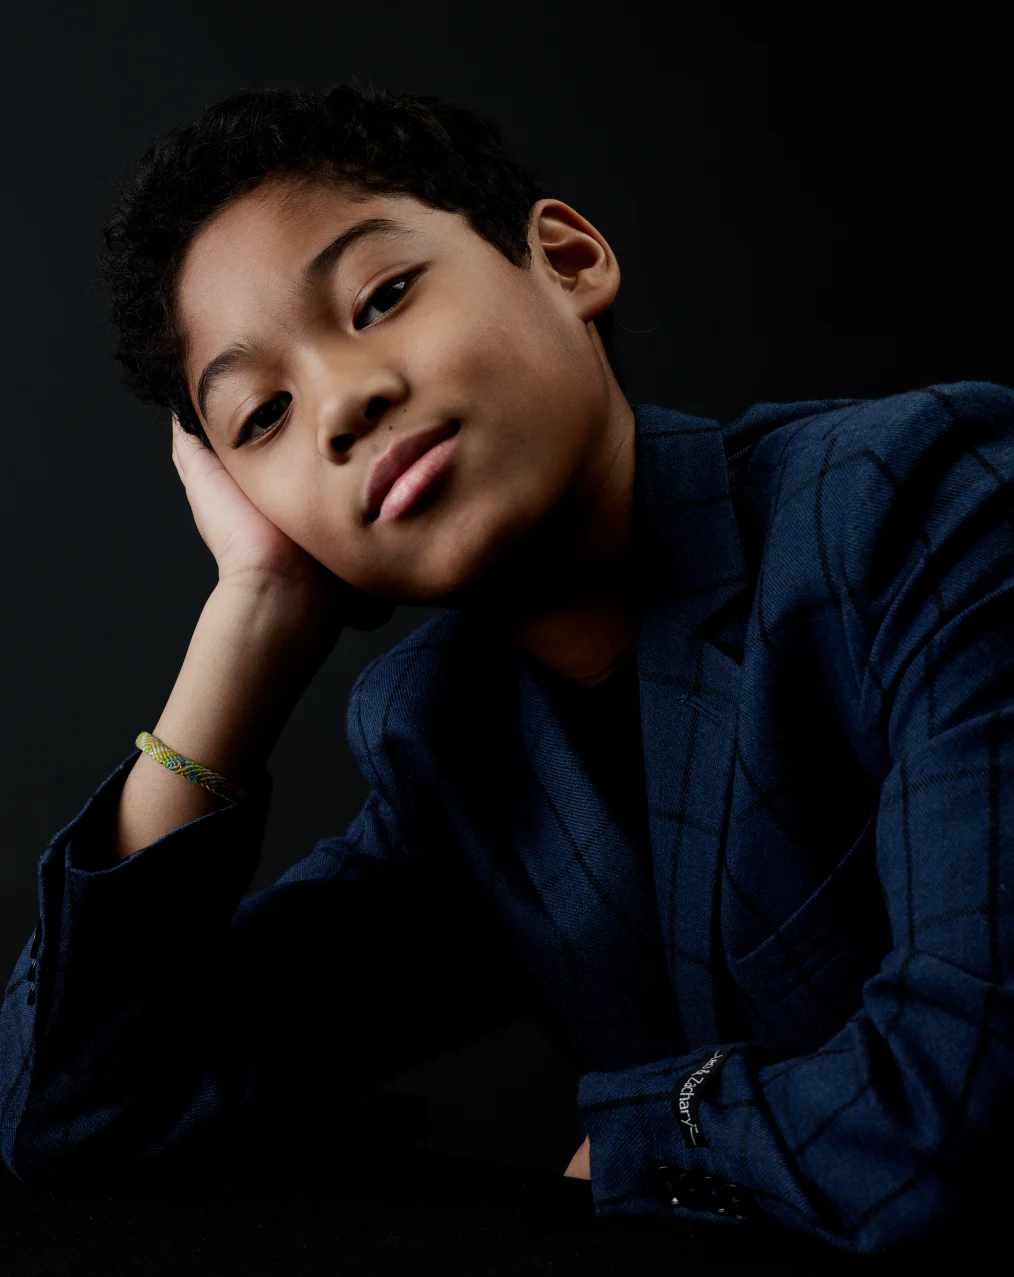 A young boy with a light skin tone rests his hand on his face as he stares into the camera. He is wearing a plaid navy suit.